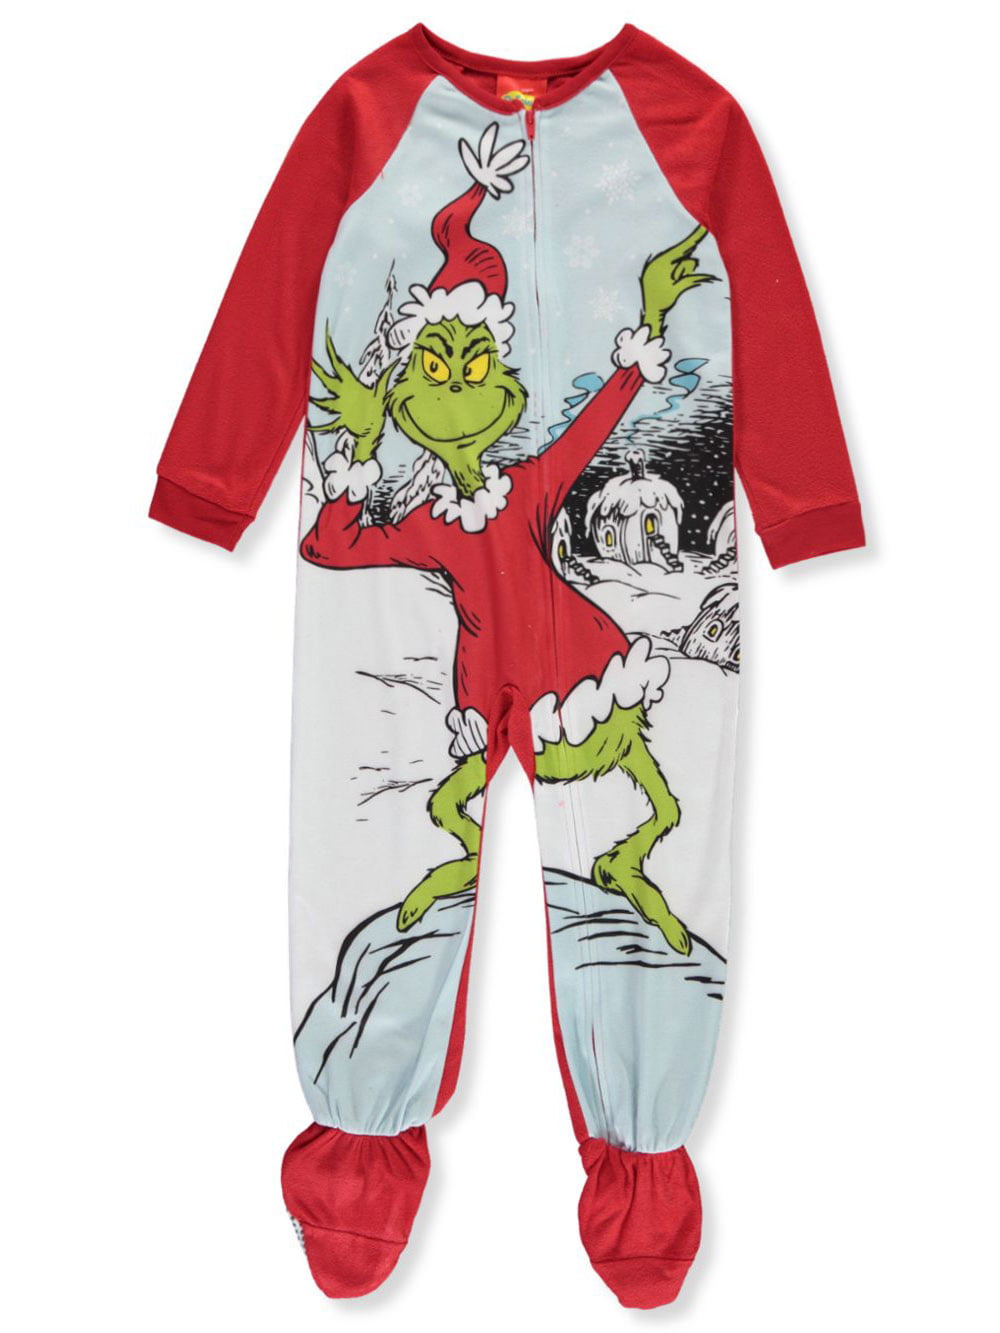 Dr. Seuss - The Grinch Toddler Boy or Girl Unisex Holiday Christmas ...